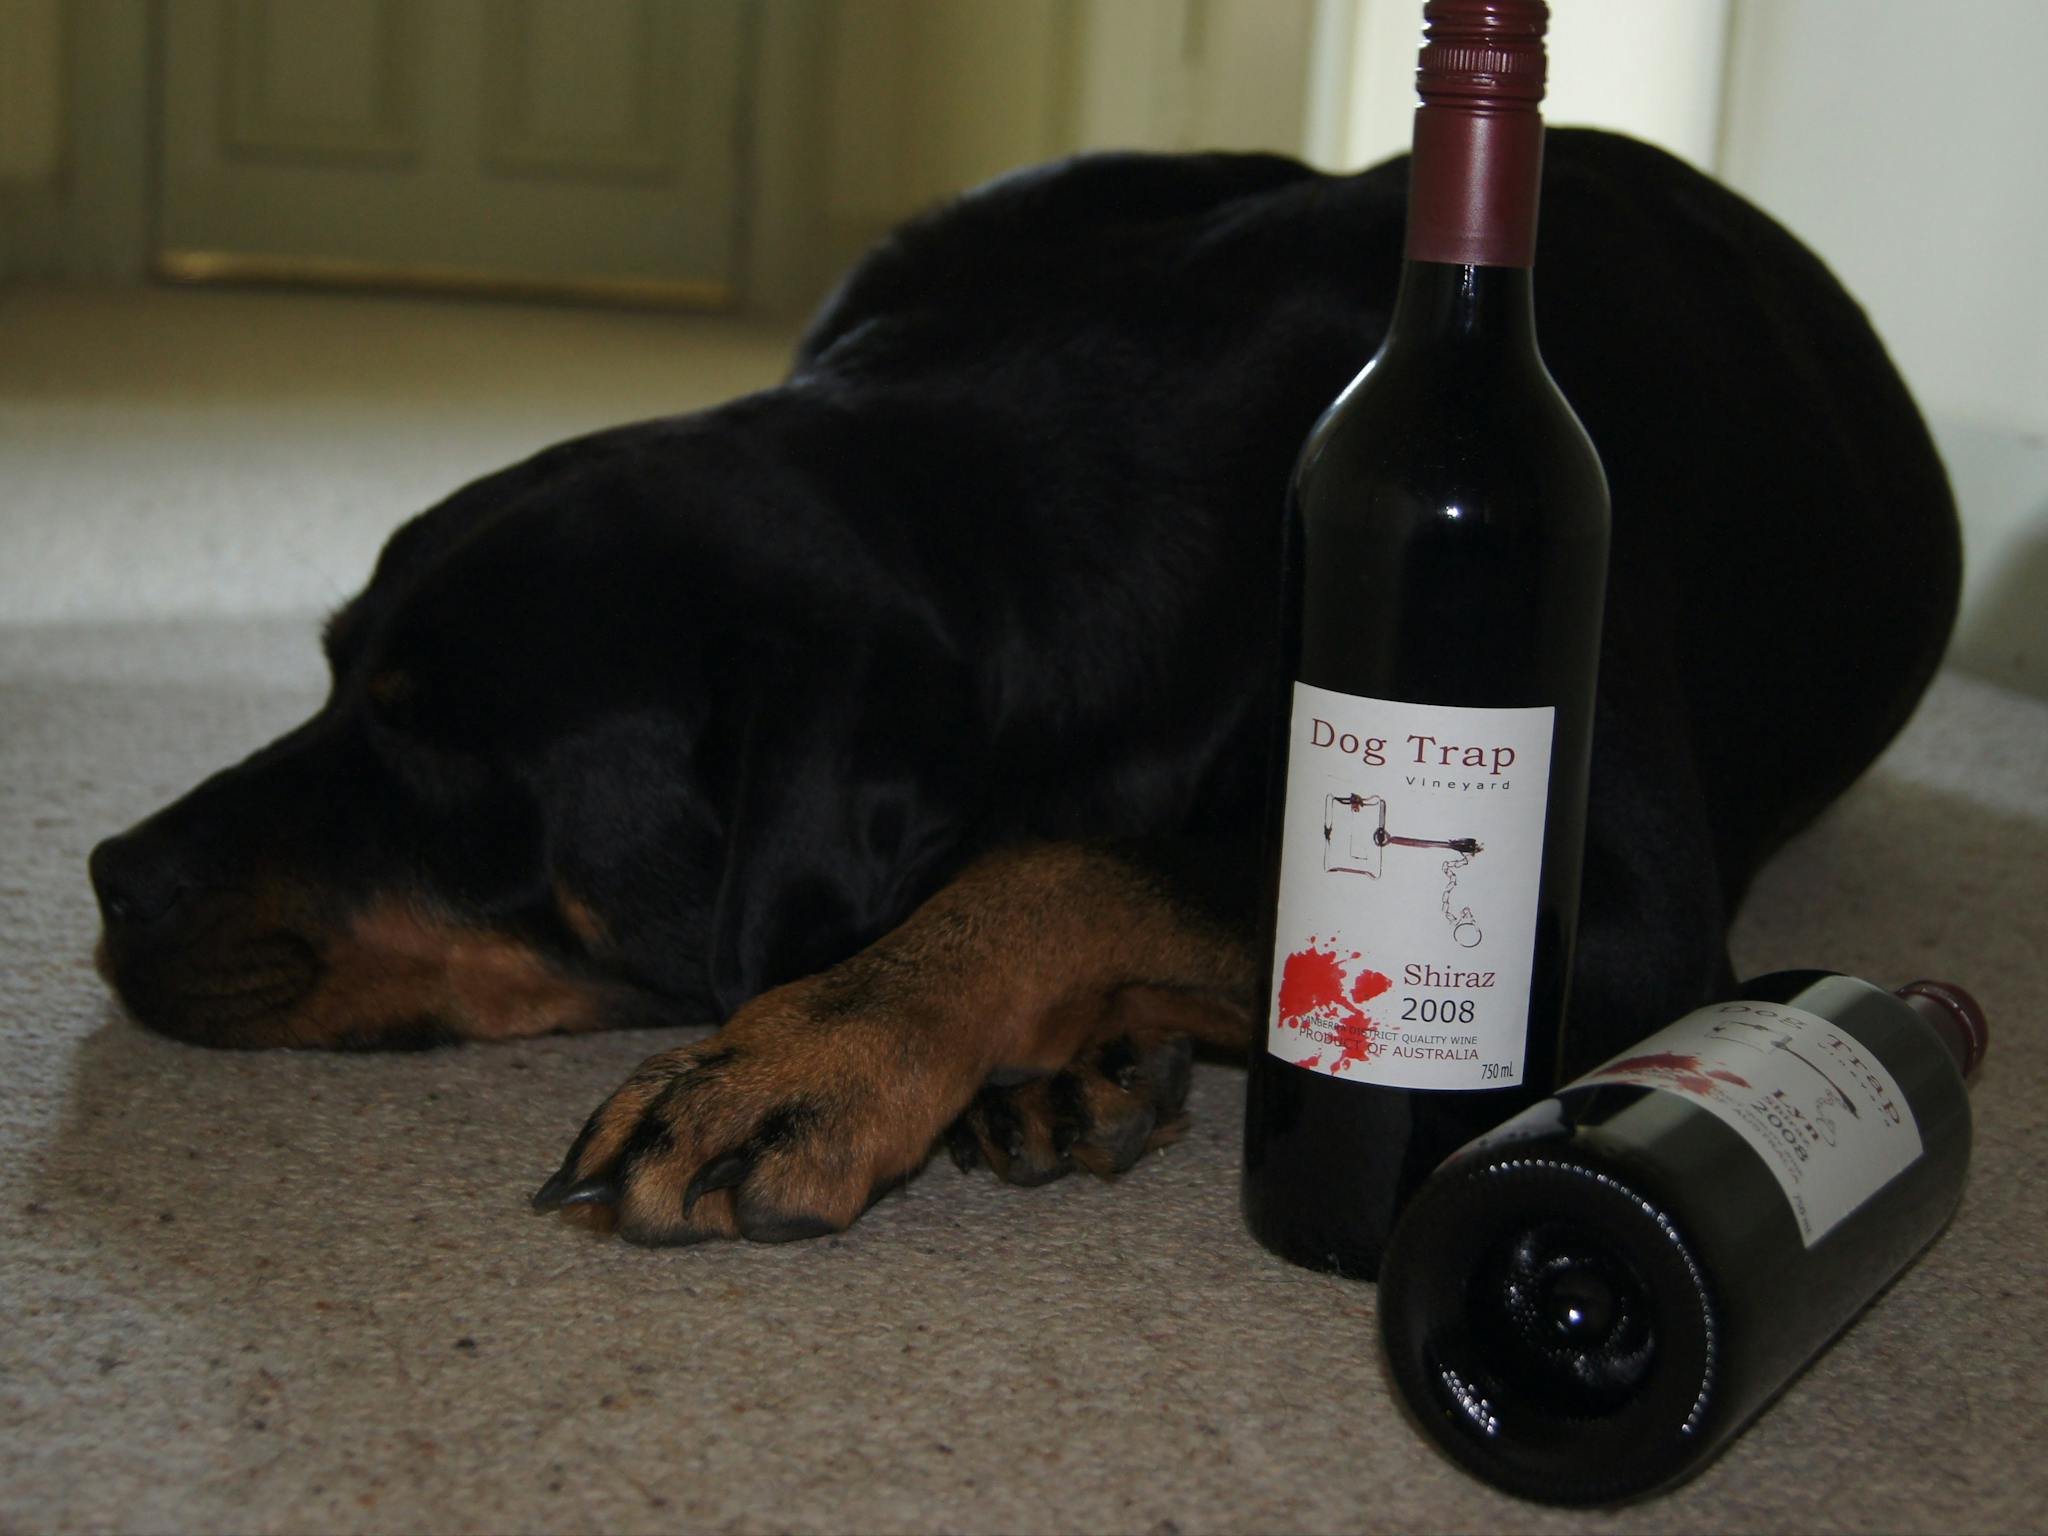 At Dog Trap Vineyard even their dog loves their wine